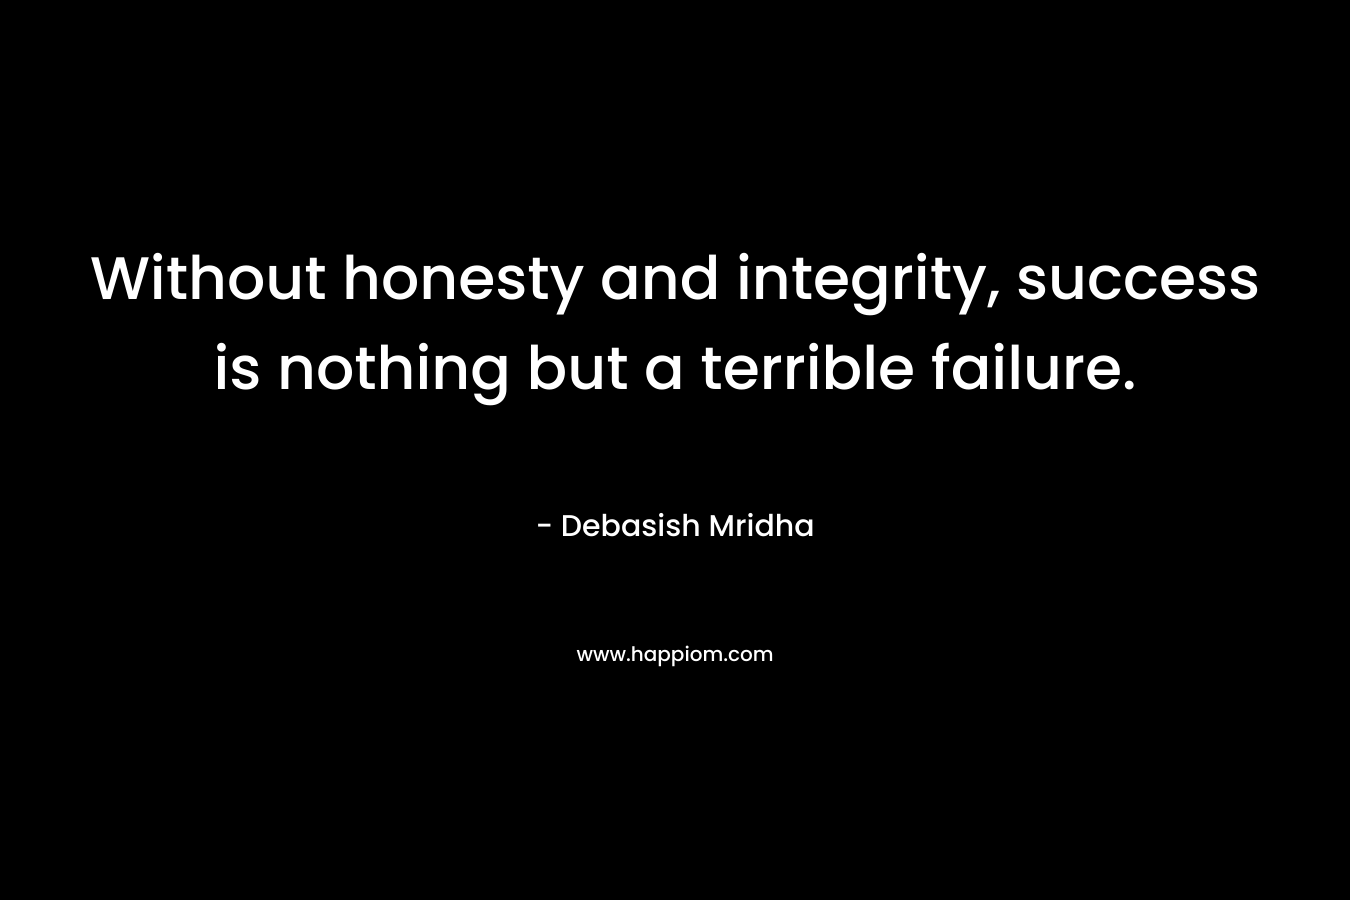 Without honesty and integrity, success is nothing but a terrible failure.